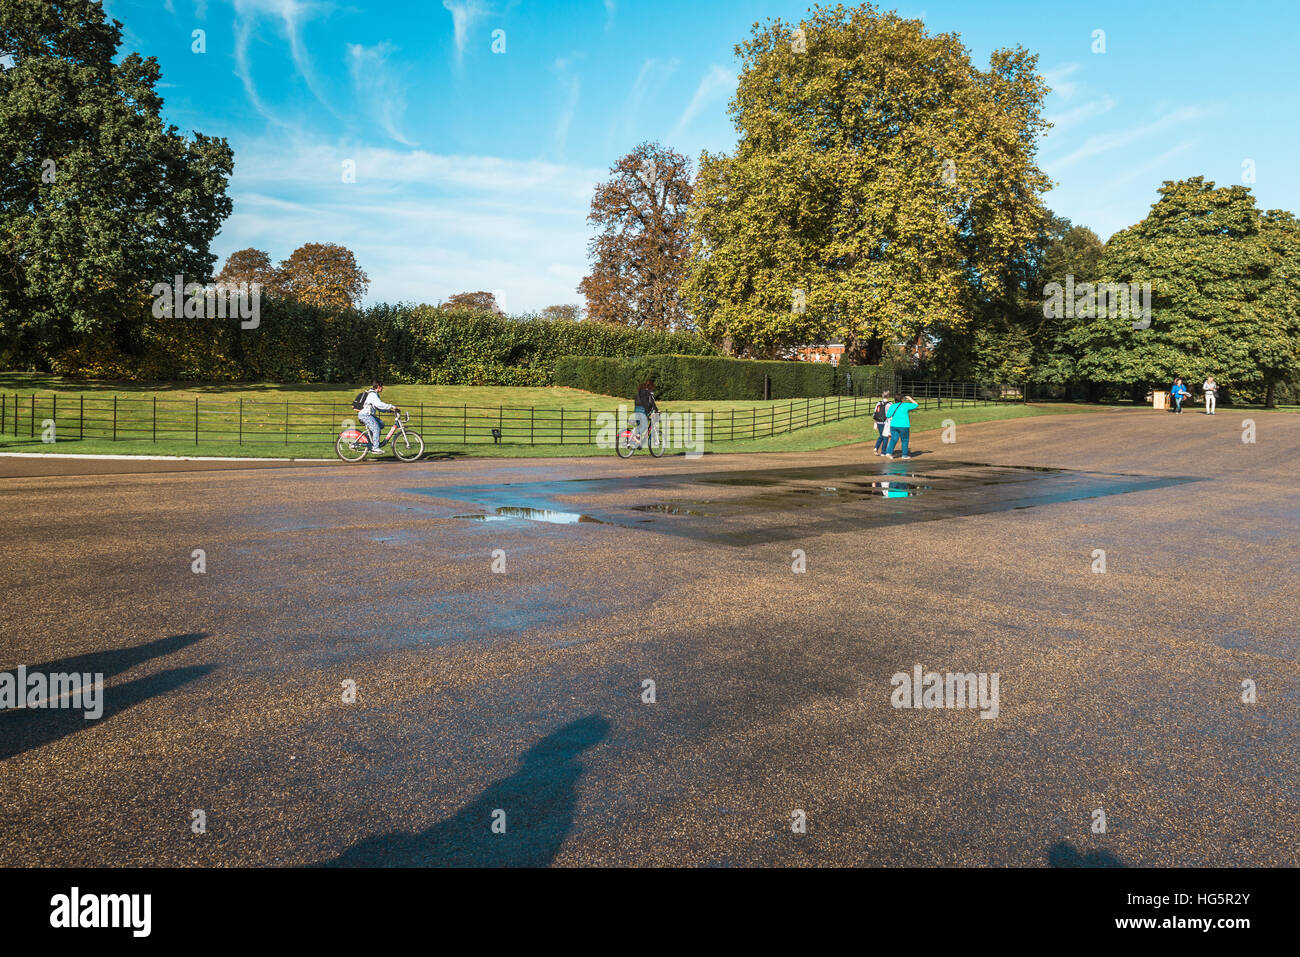 London, United Kingdom - October 17, 2016: People are visiting Kensington Gardens outside of Kensington Palace in London, England Stock Photo